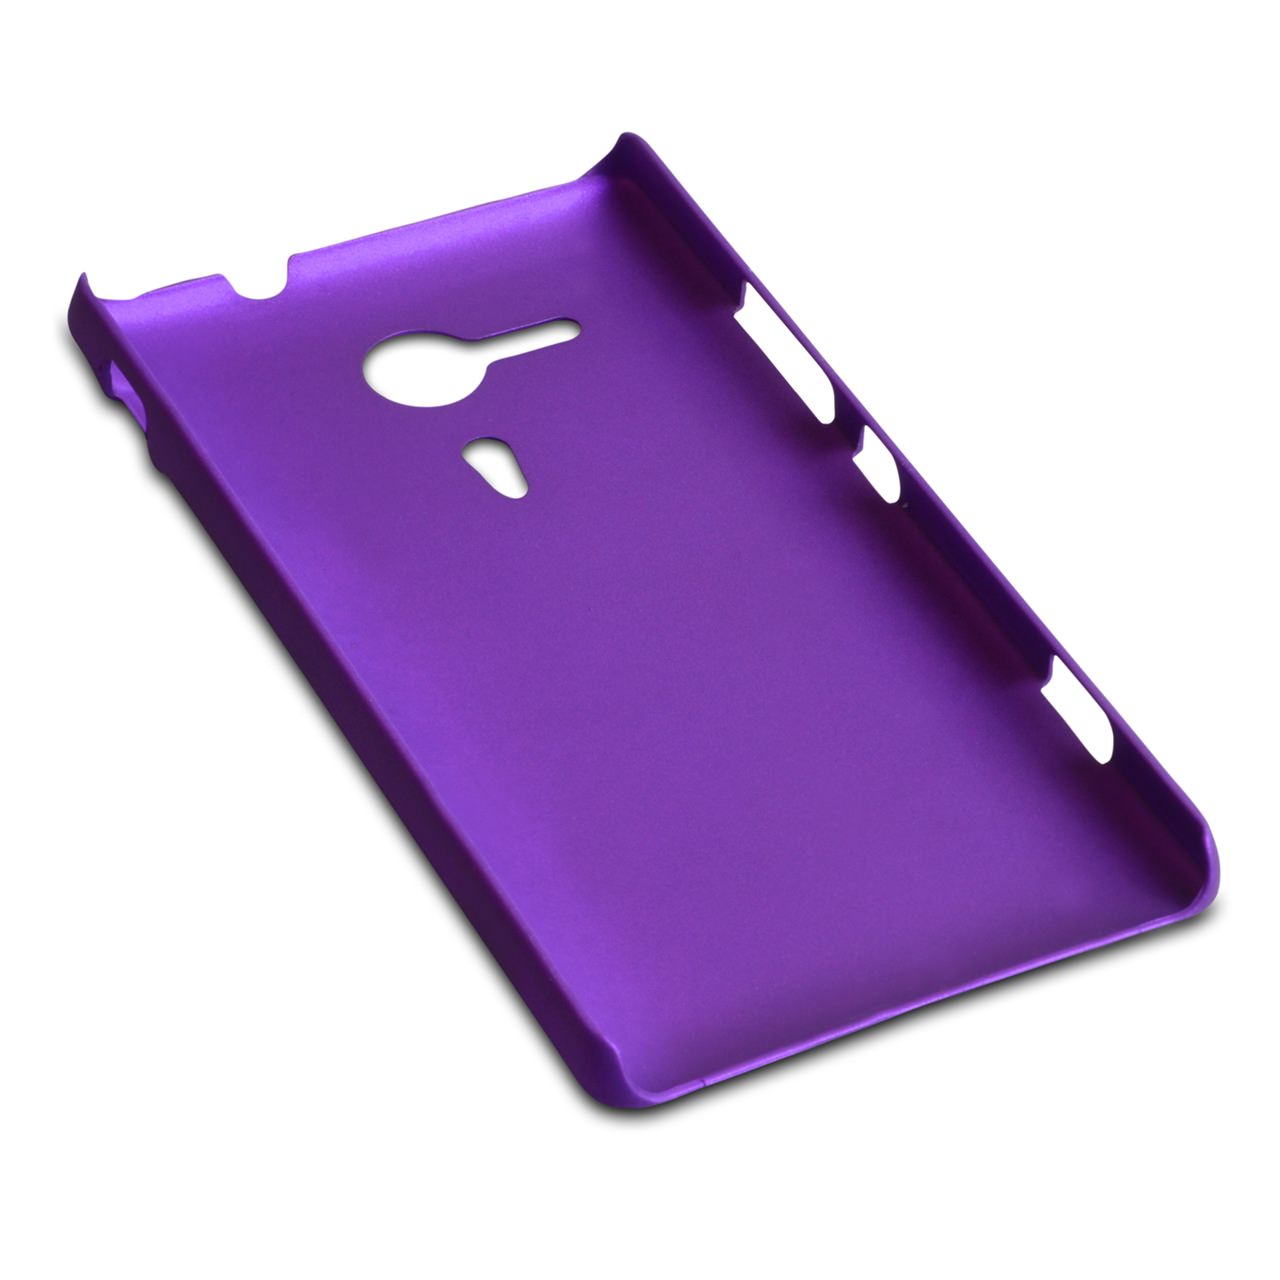 YouSave Accessories Sony Xperia SP Hard Hybrid Case - Purple